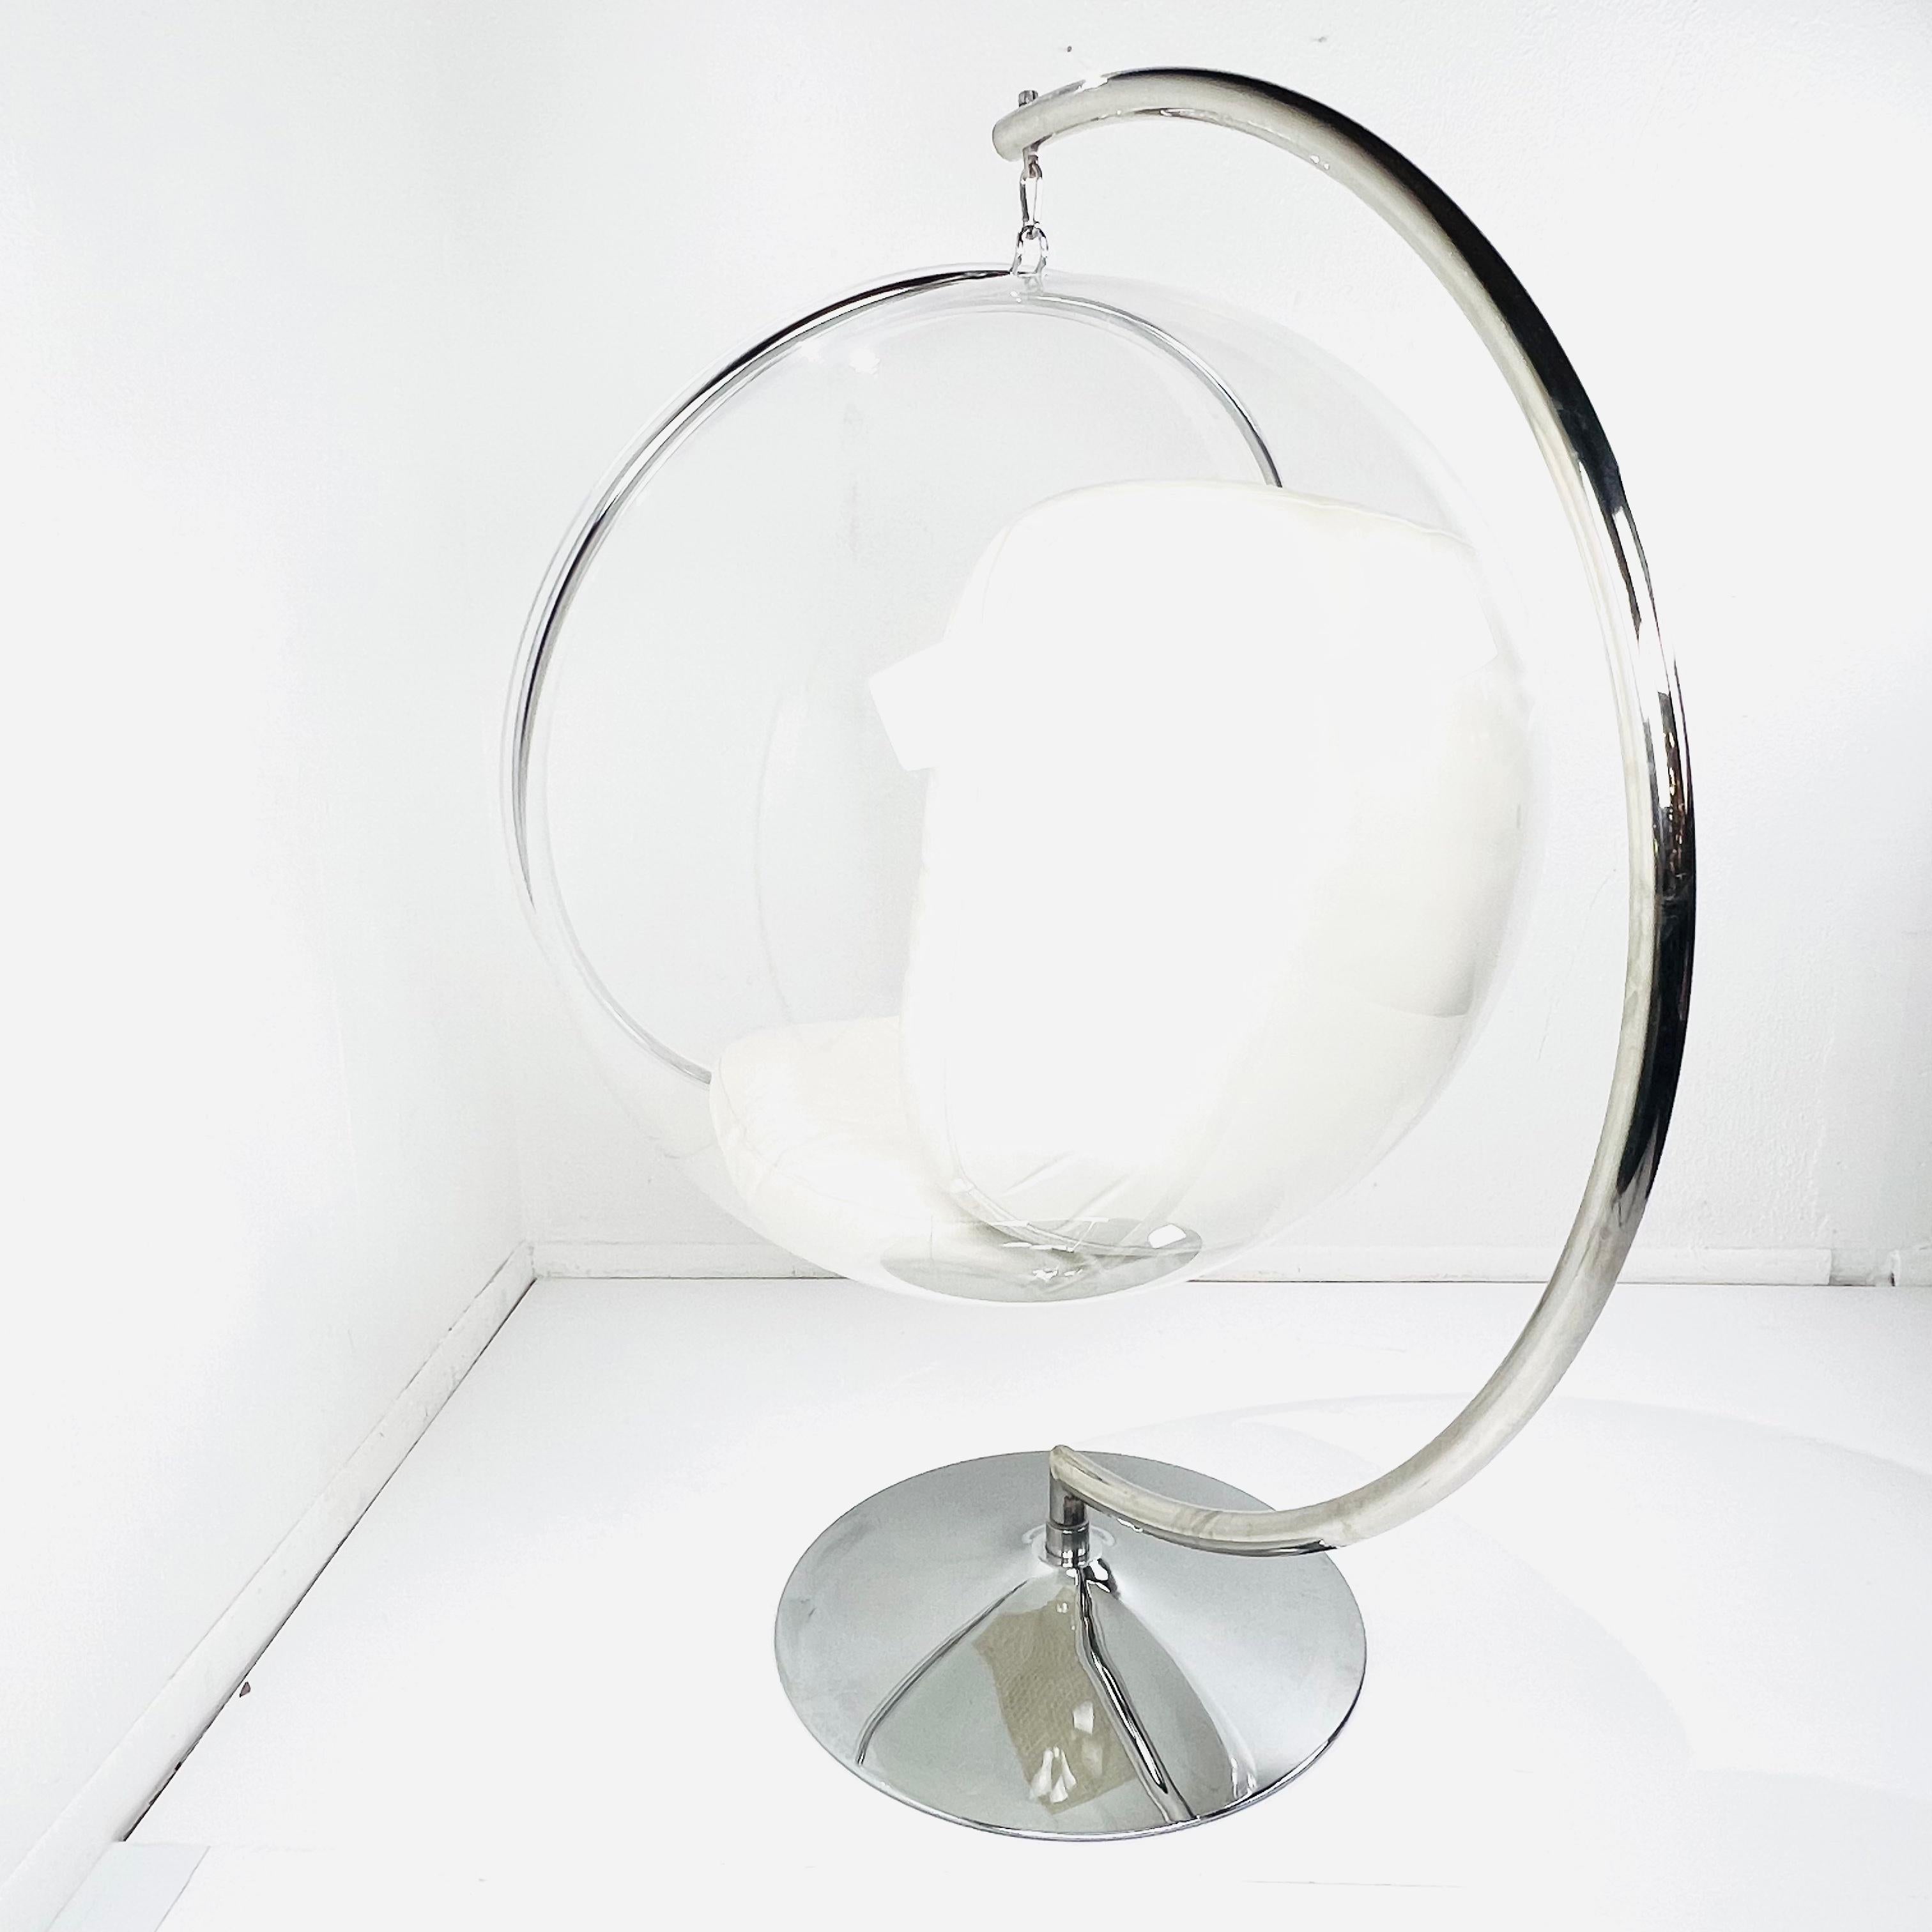 Stainless Steel Eero Aarnio Suspended Lucite Bubble Chair For Sale